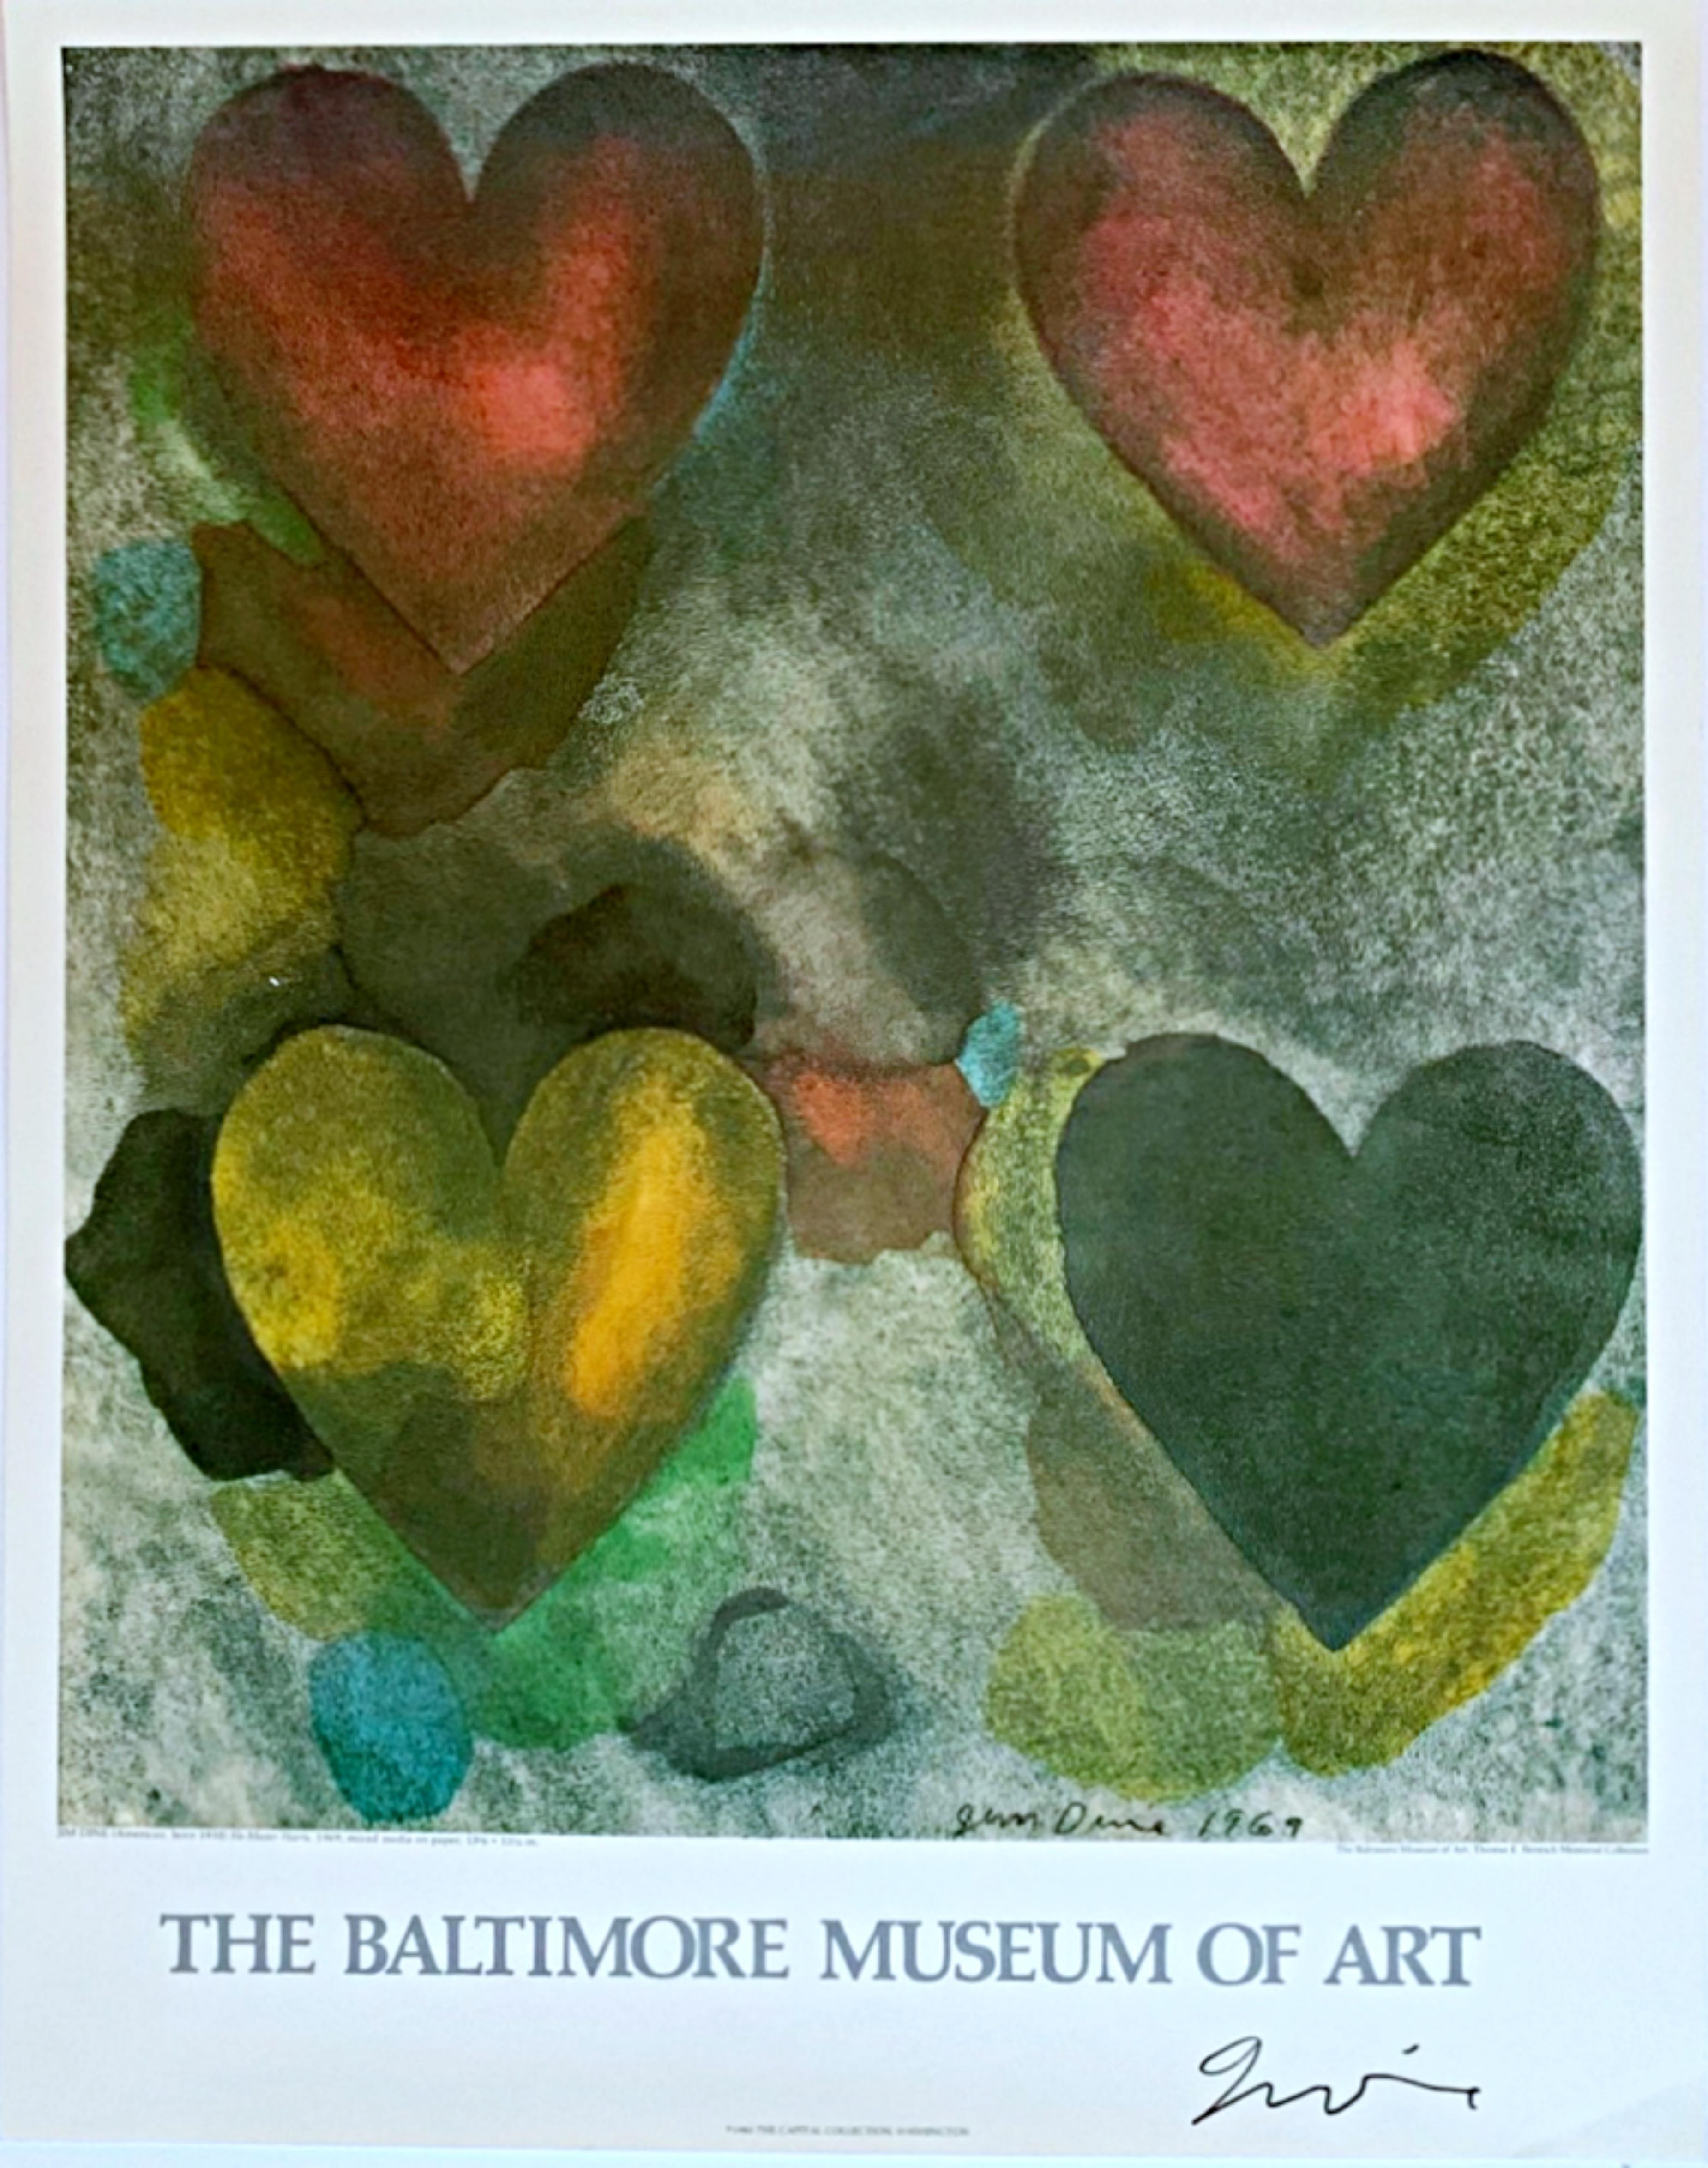 Jim Dine
Hearts (Hand Signed), 1983
Offset lithograph
28 × 22 inches
Boldly signed in black marker on the front
Unframed
This vintage hand signed 1983 poster depicting Jim Dine's painting Flo Master Hearts in the permanent collection of the